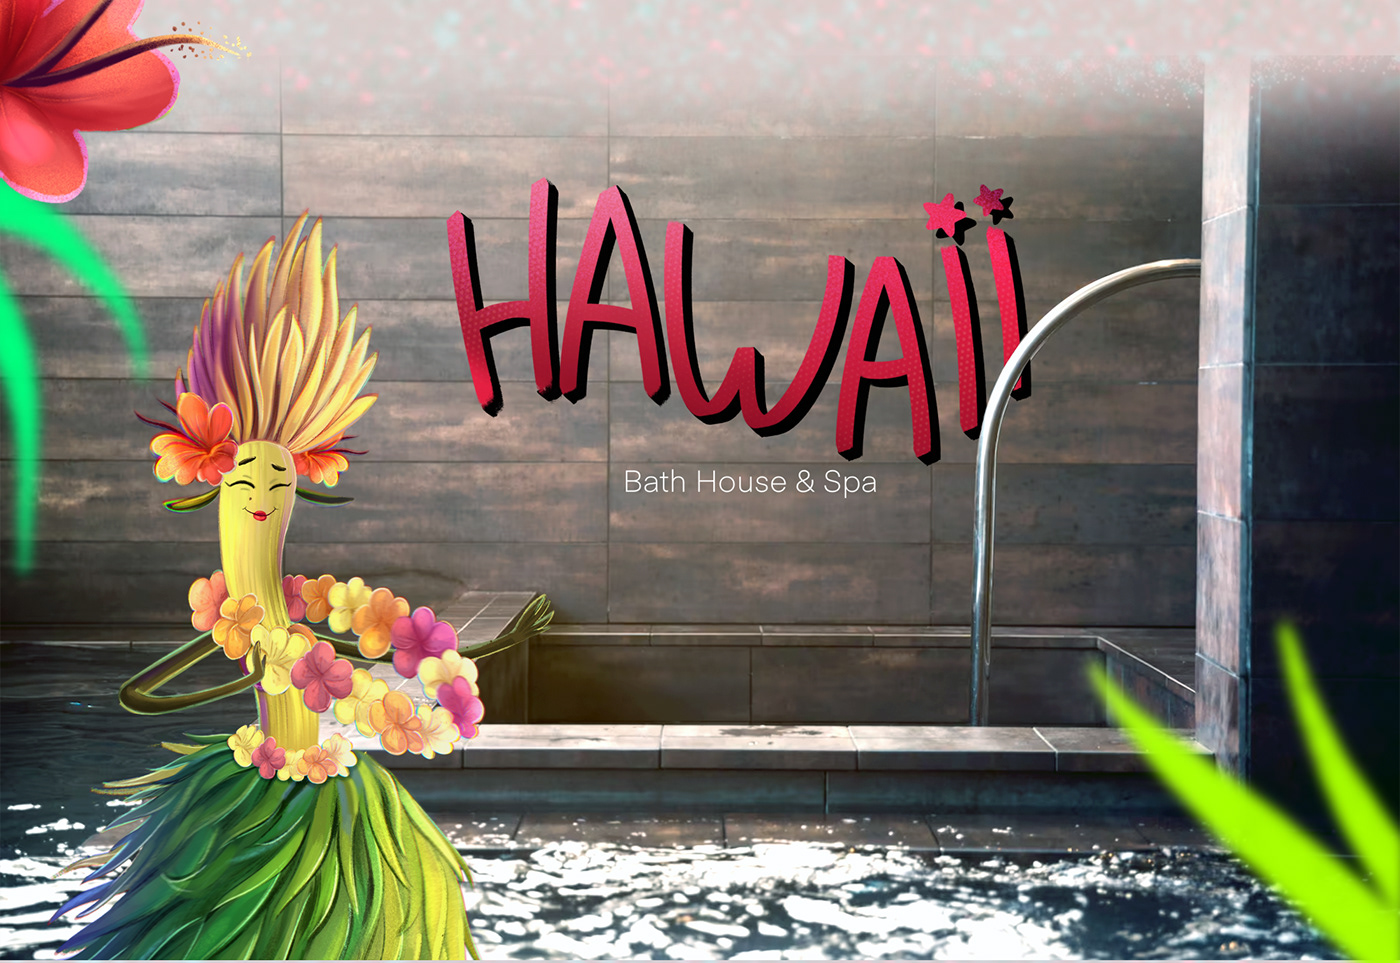 This is a concept project for the development of a brand character for a bath house and spa “Hawaii”